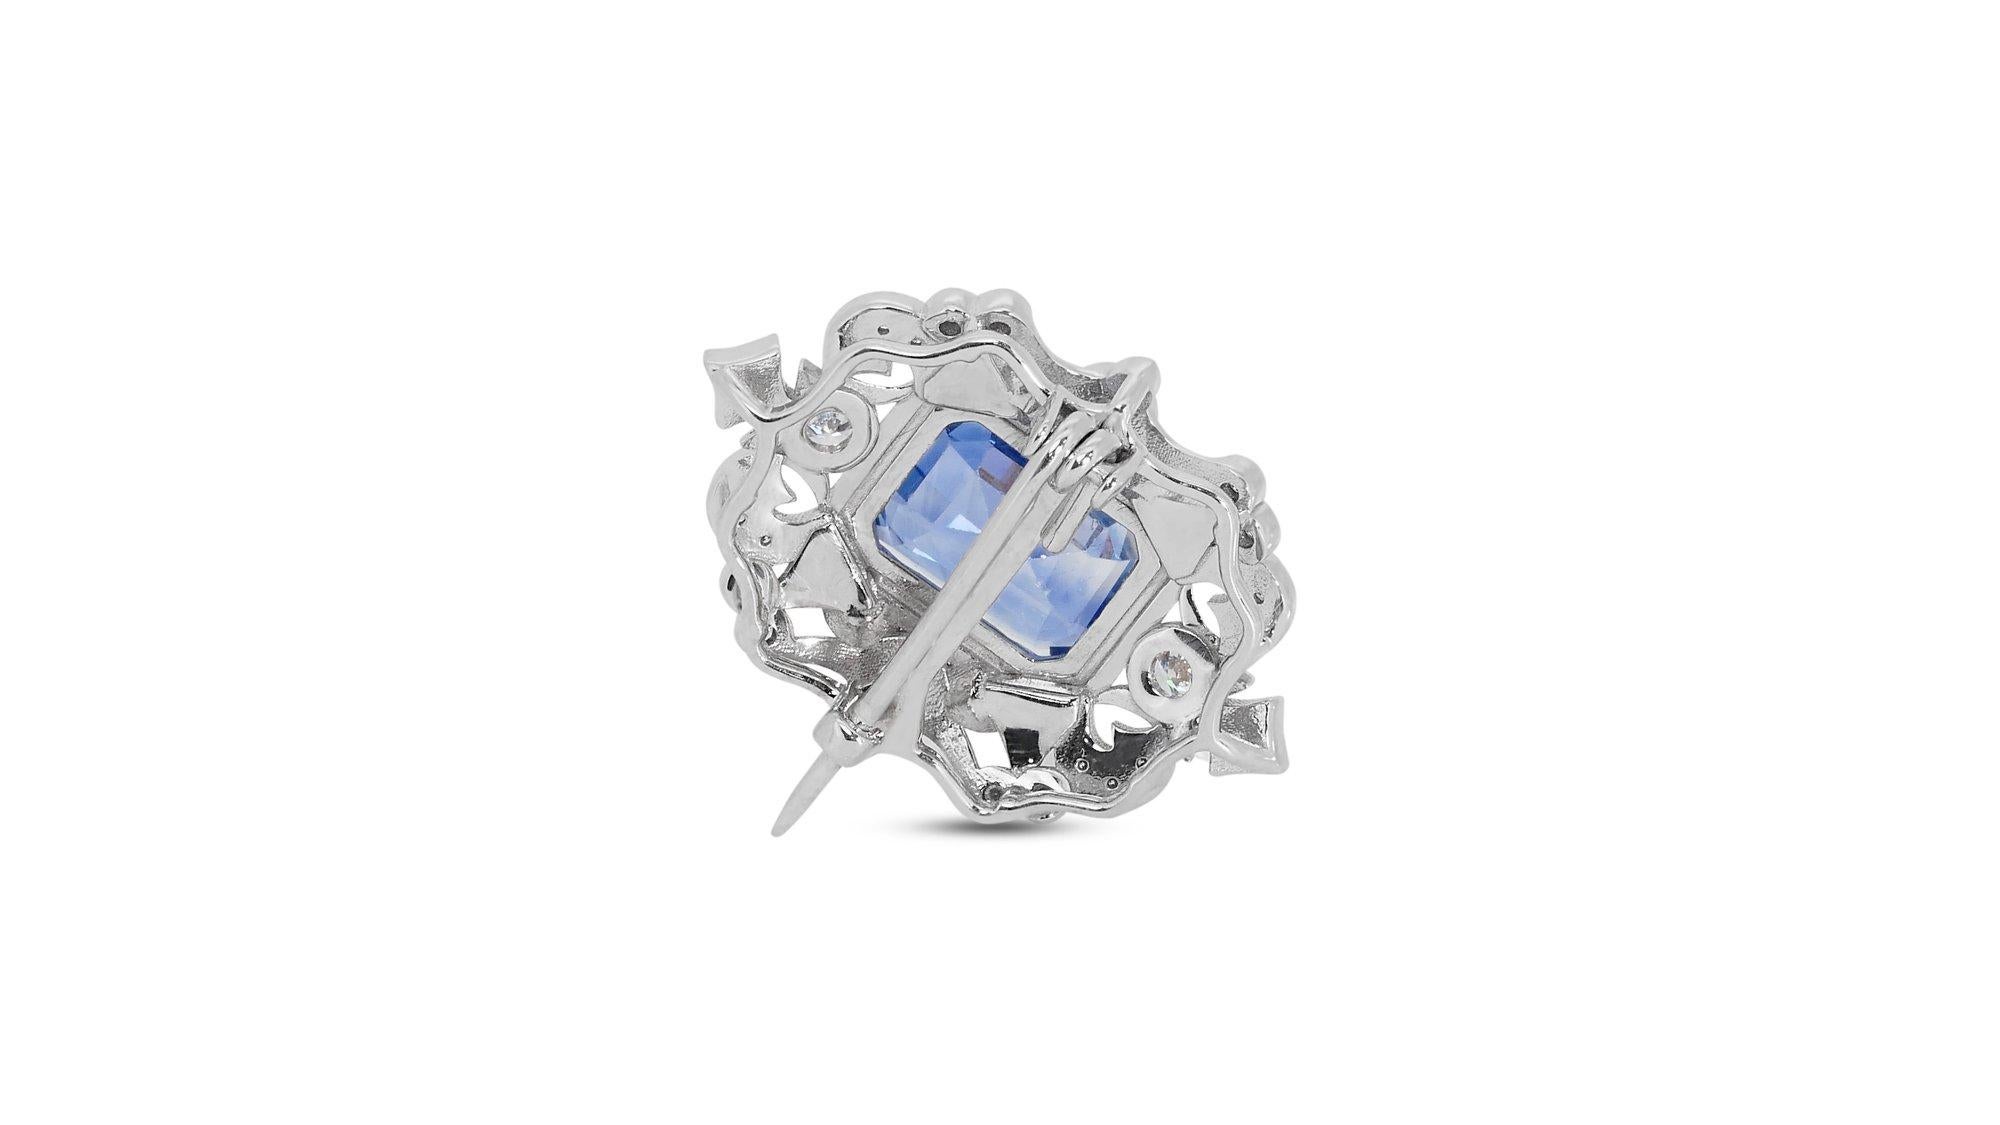 18k White Gold Brooch w/ 5.65 ct Sapphire and Natural Diamonds GIA Certificate For Sale 3